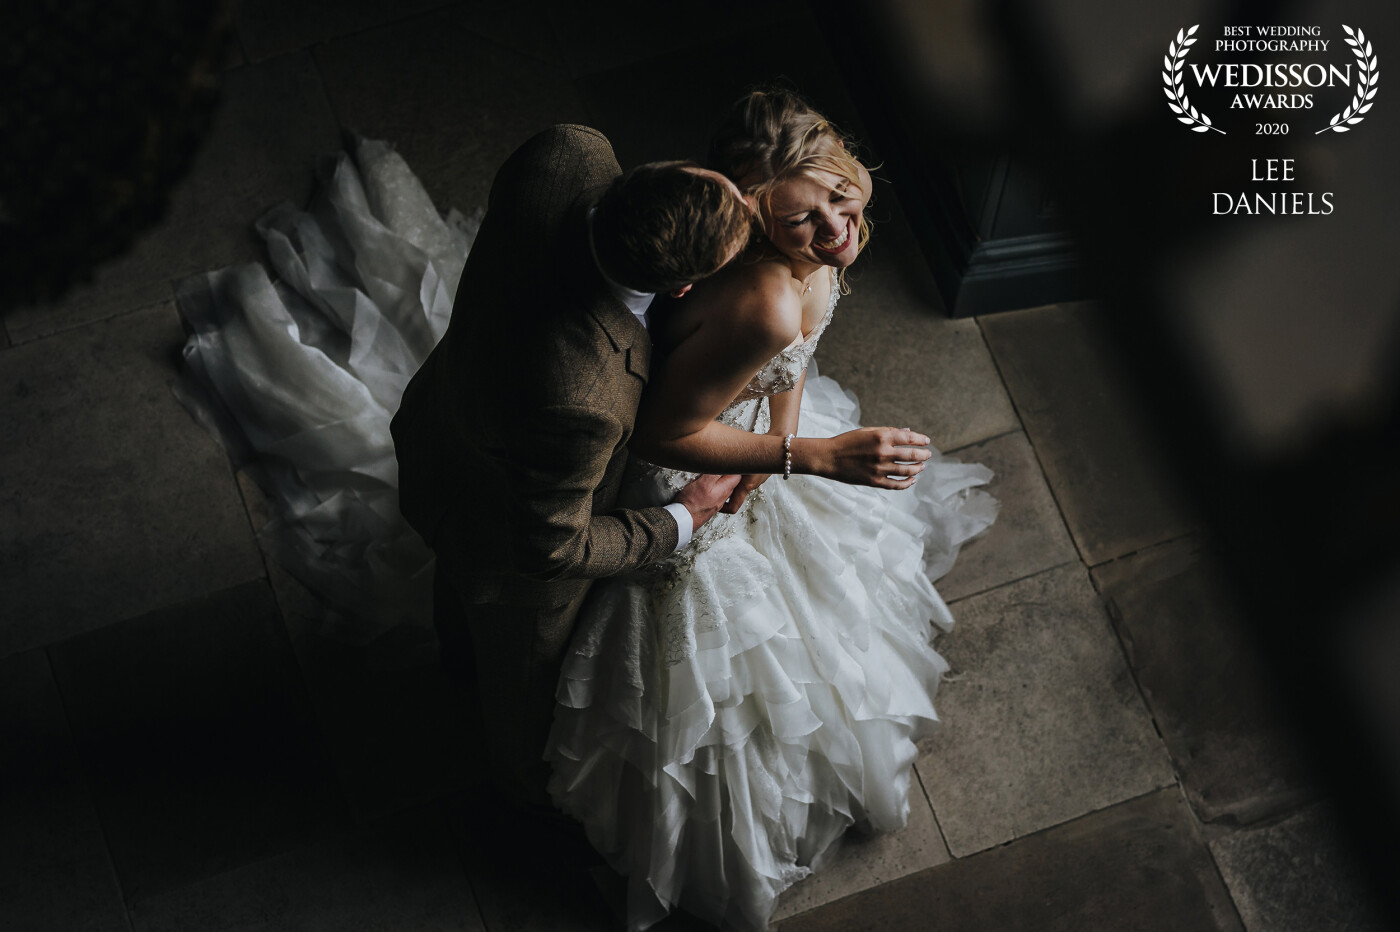 Aynslie & Hugh were such fun, expressive characters; so it didn’t take much for me to coax the laughter out of them. I placed them in front of some natural window light, underexposed for the highlights, and let them do the rest. <br />
<br />
Venue – Stubton Hall Newark <br />
